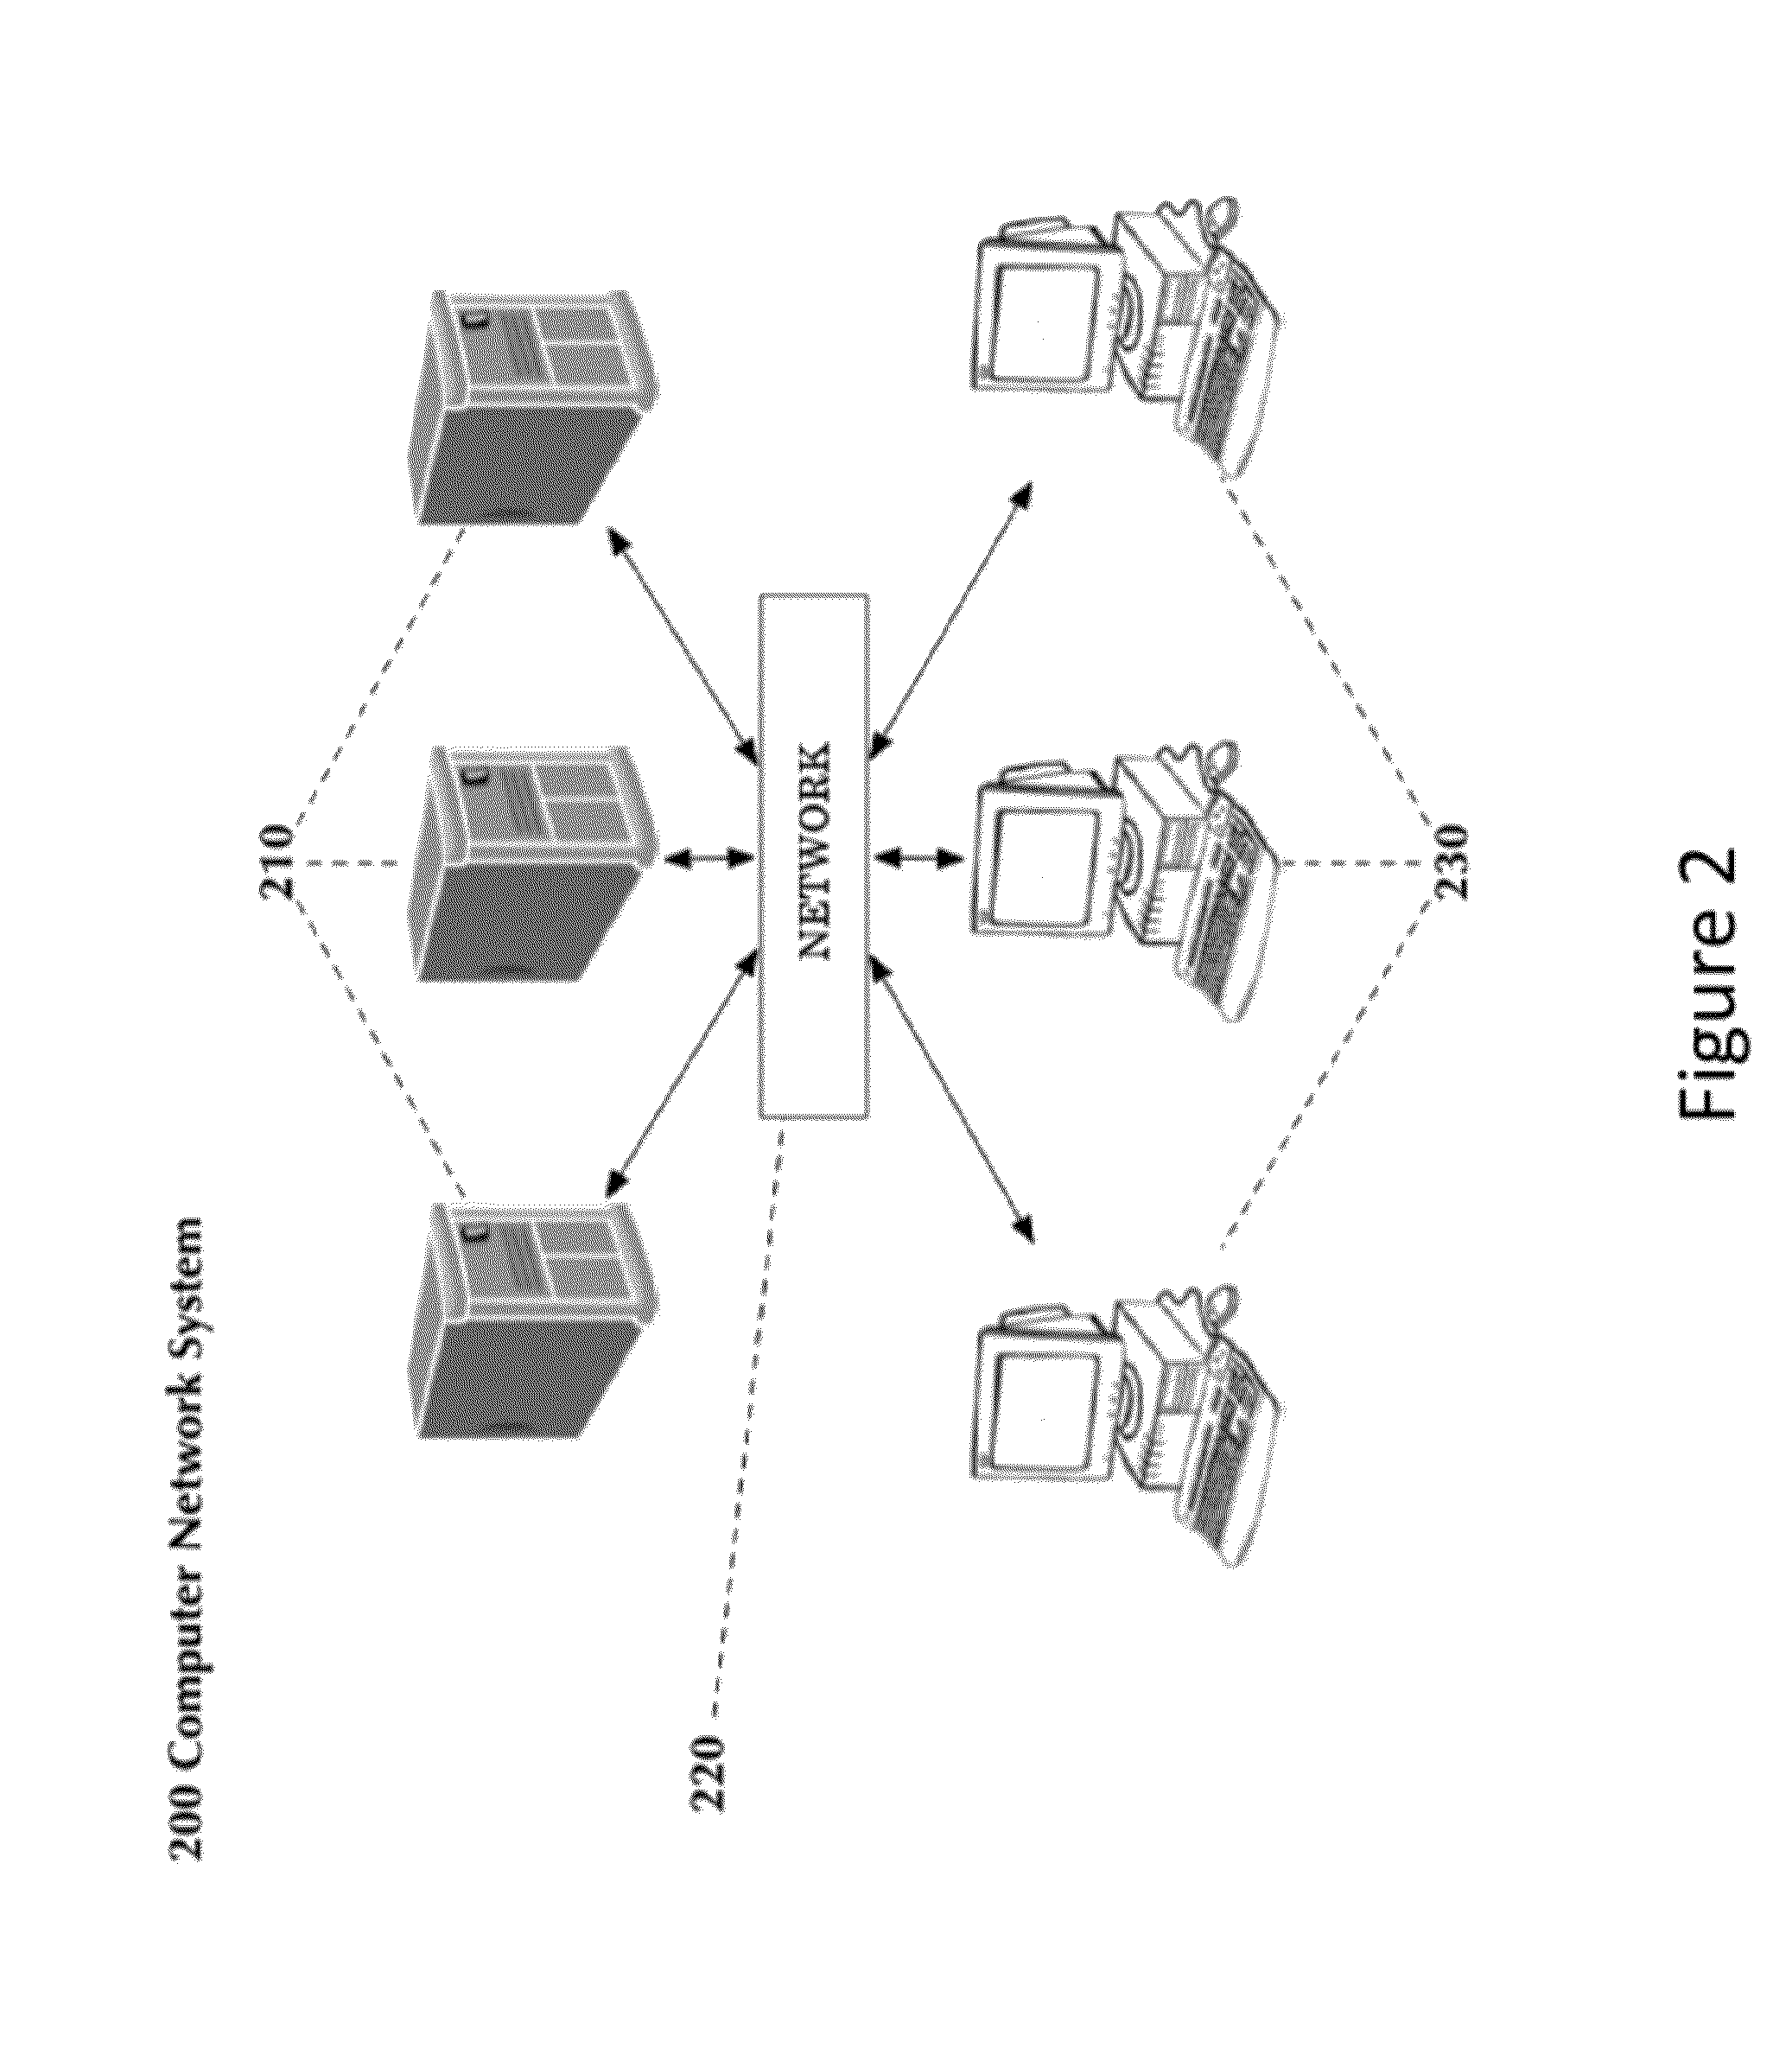 Computer based system and method for medical symptoms analysis, visualization and social network